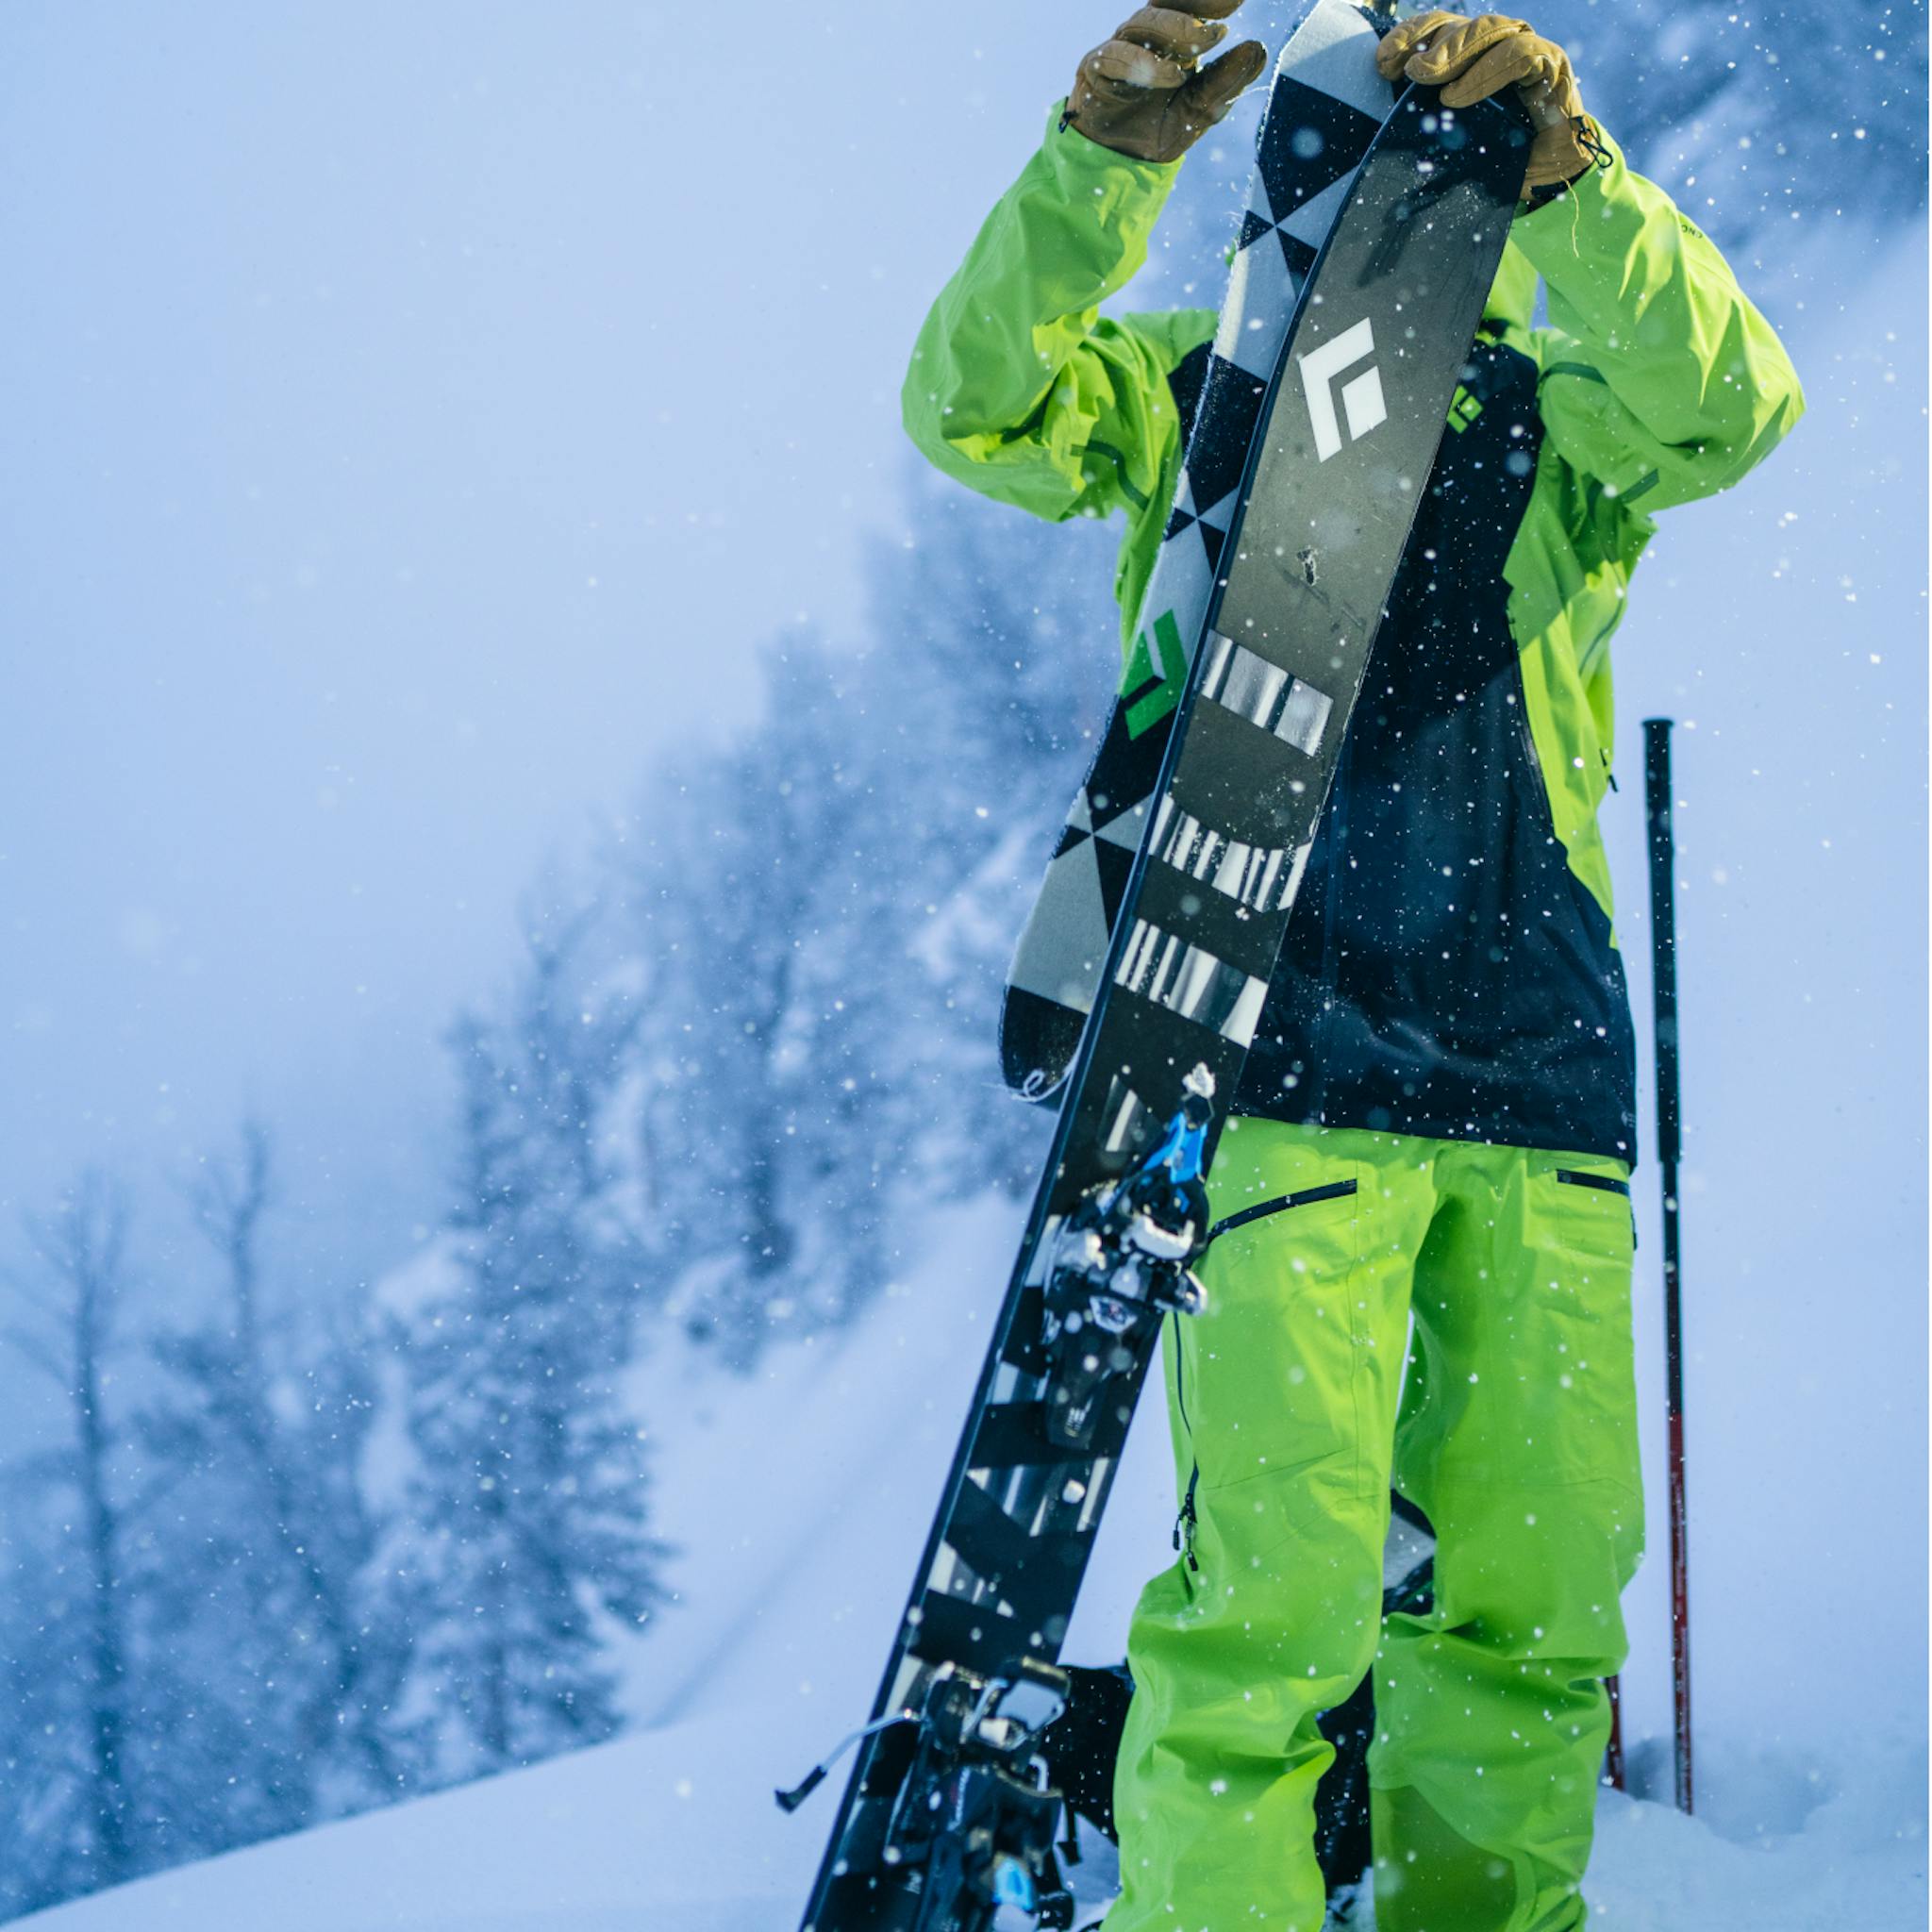 A skier puts skins on his Impulse 104 Skis with